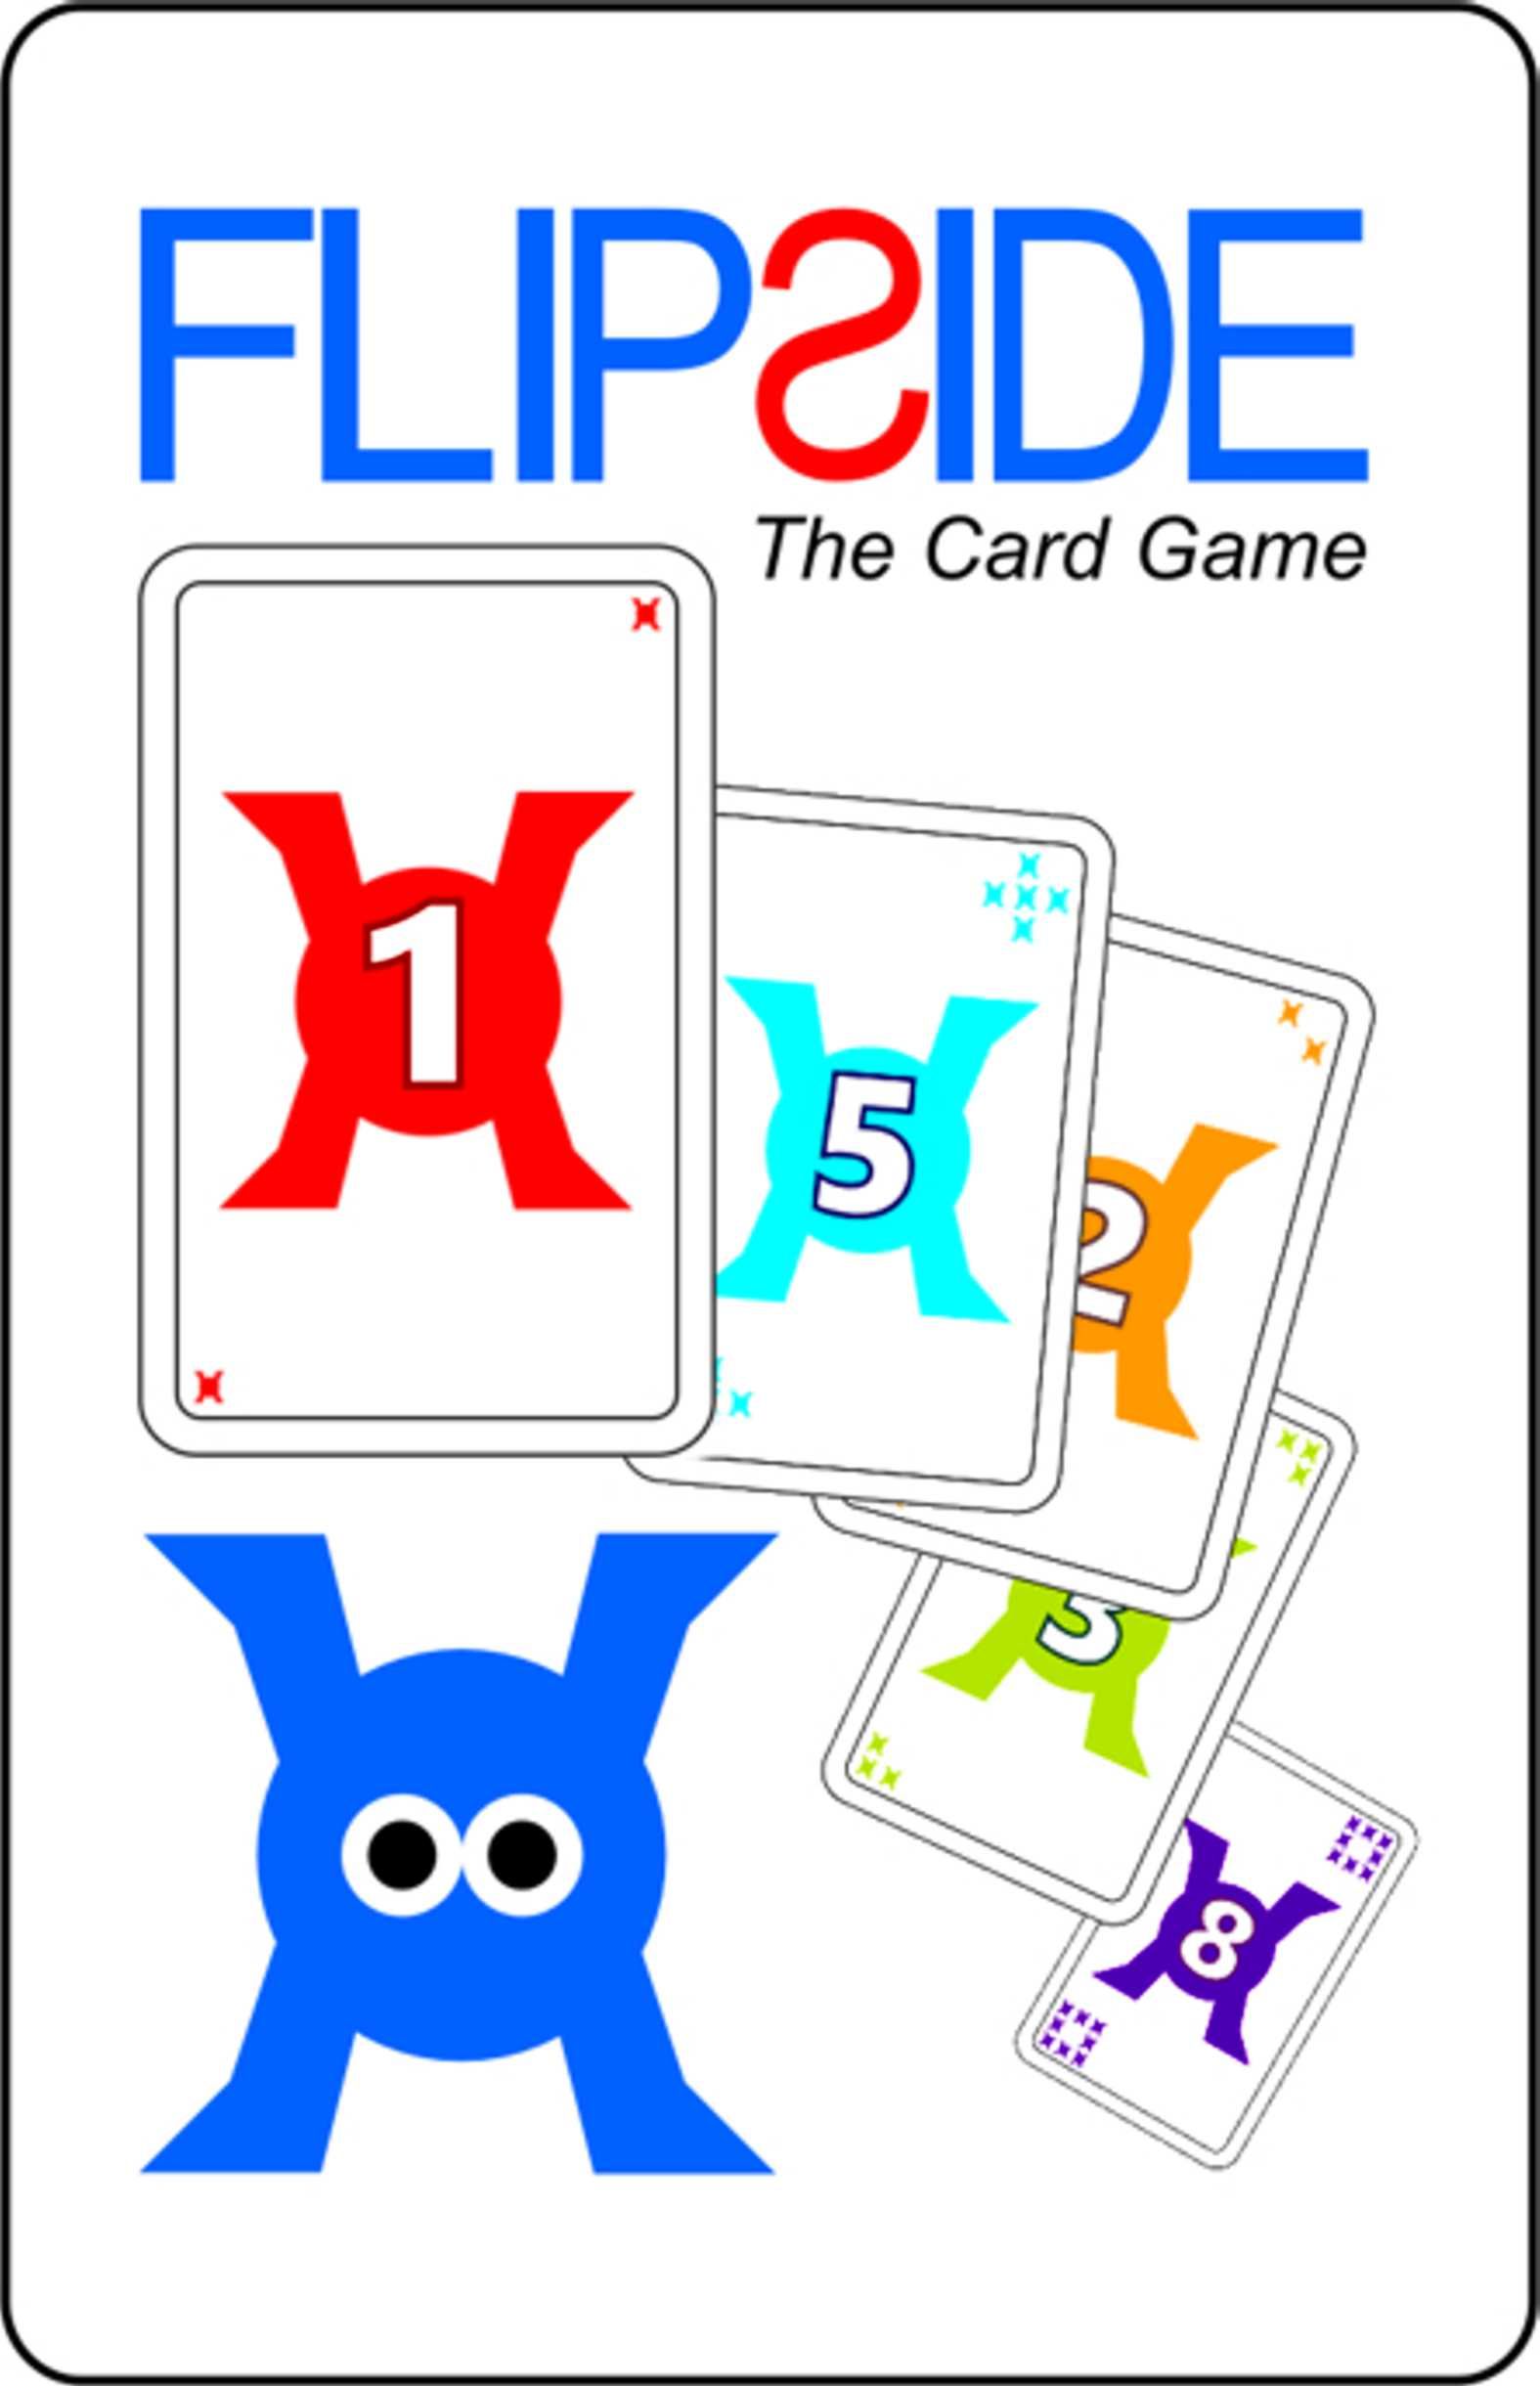 Flipside: The Card Game